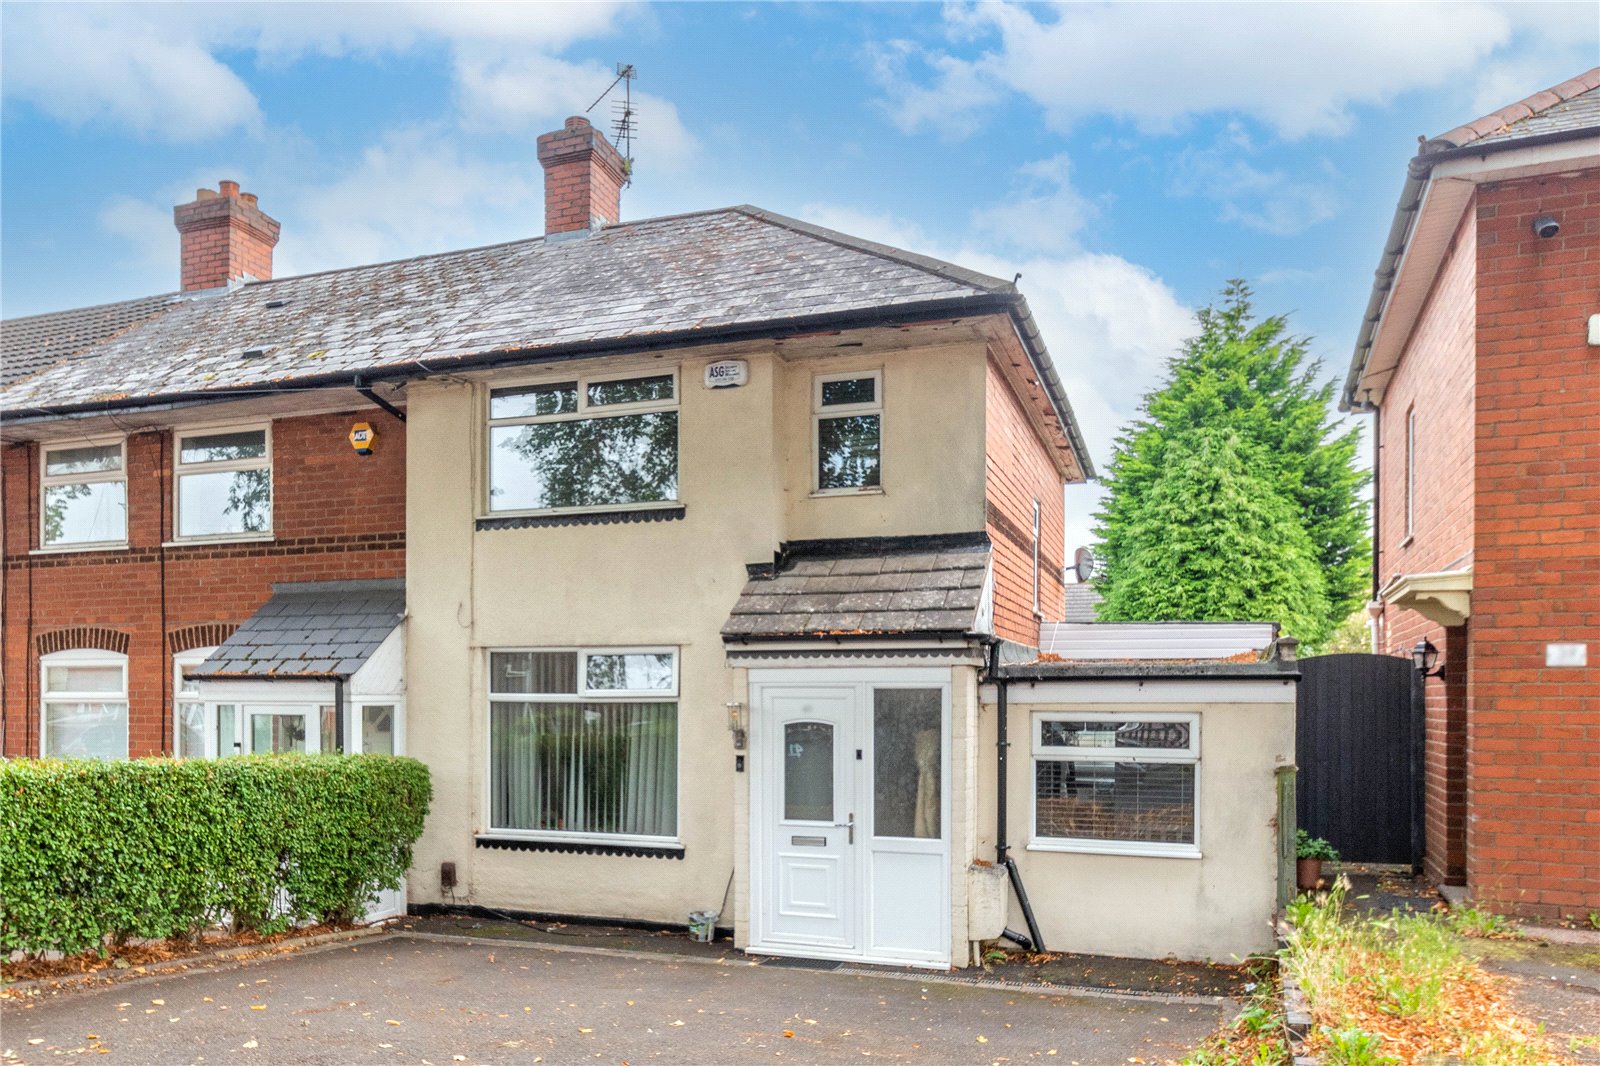 2 bed house for sale in Wasdale Road, Birmingham - Property Image 1